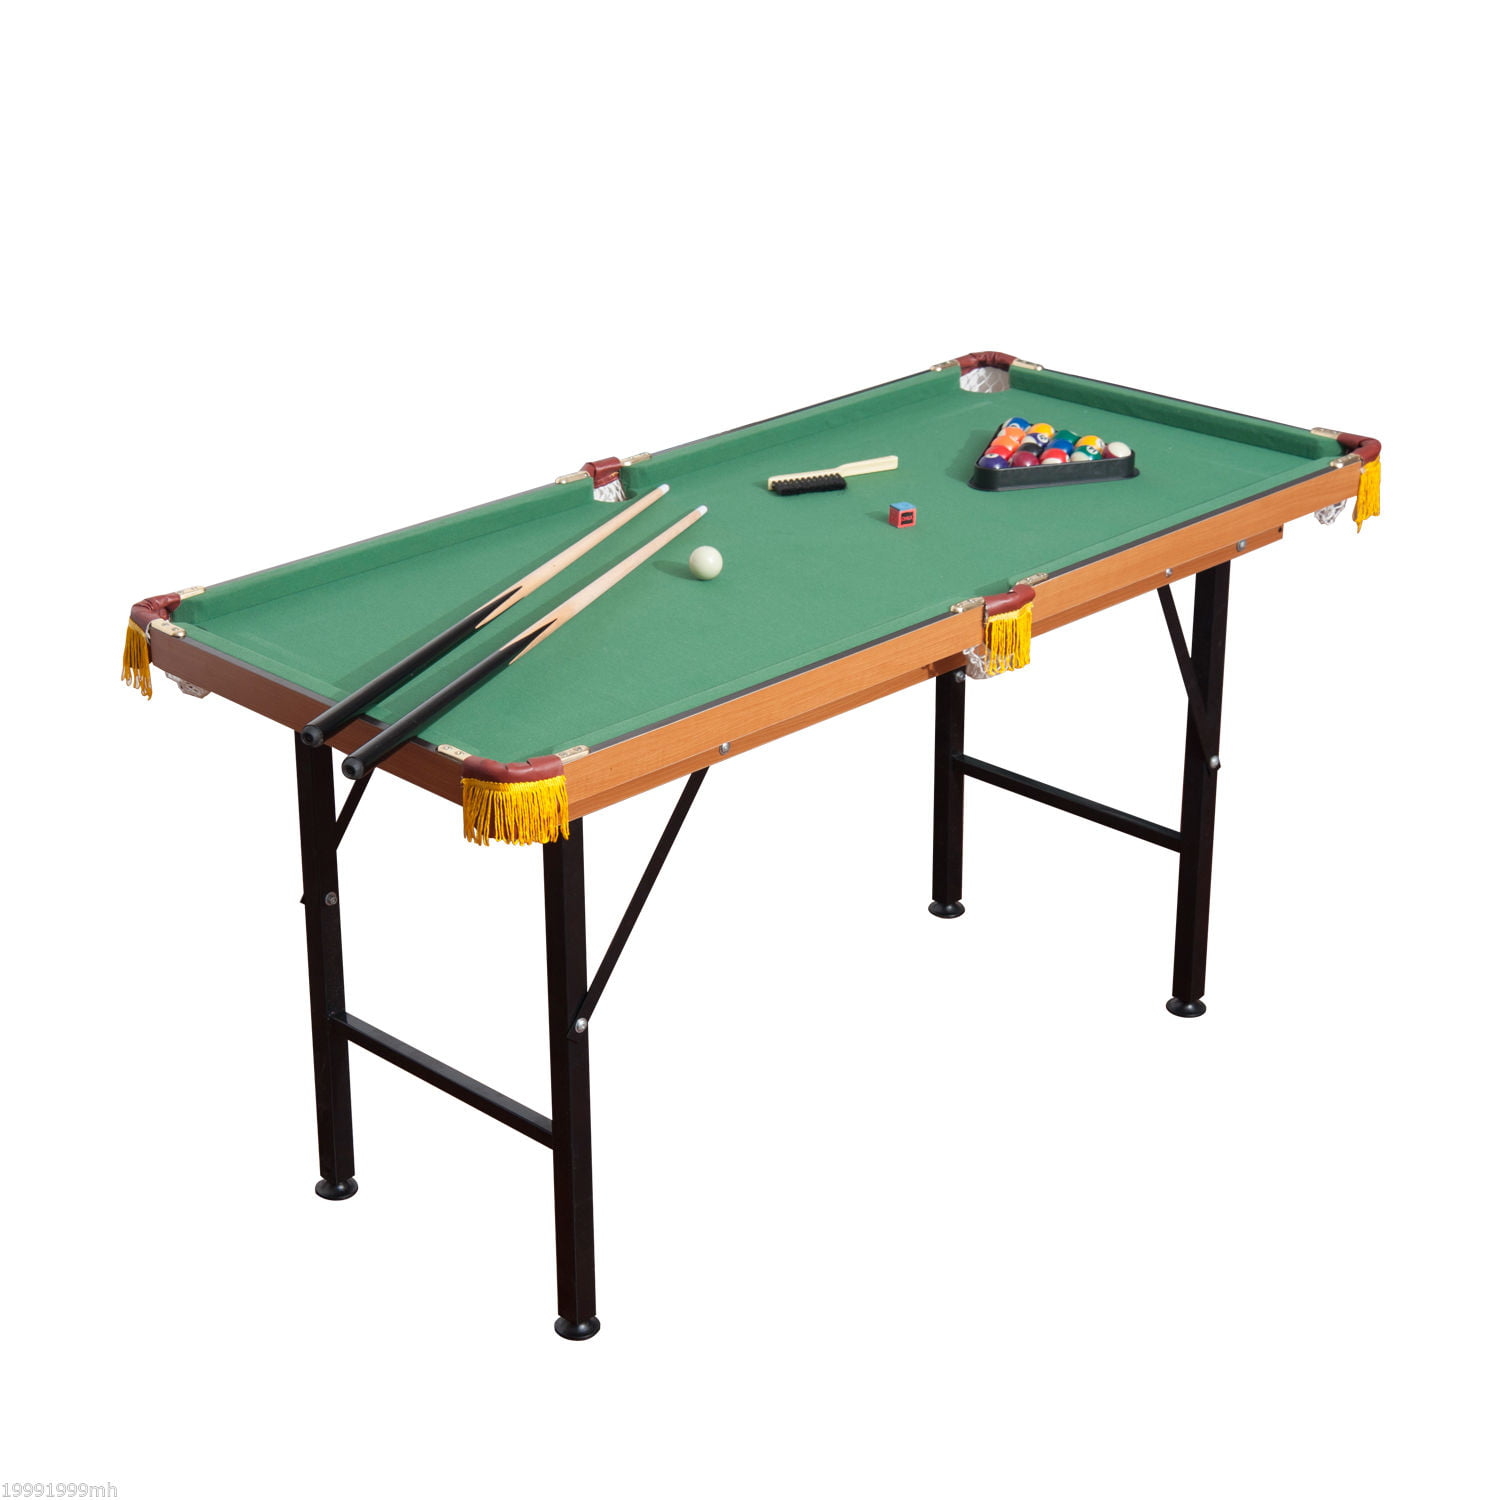 Ball Soozier Portable Foldable Free Standing Brush Mini Billiard Table for Kids w/ All Accessories Home Pool Game Table 54.3 L Includes Cues Chalk Rack